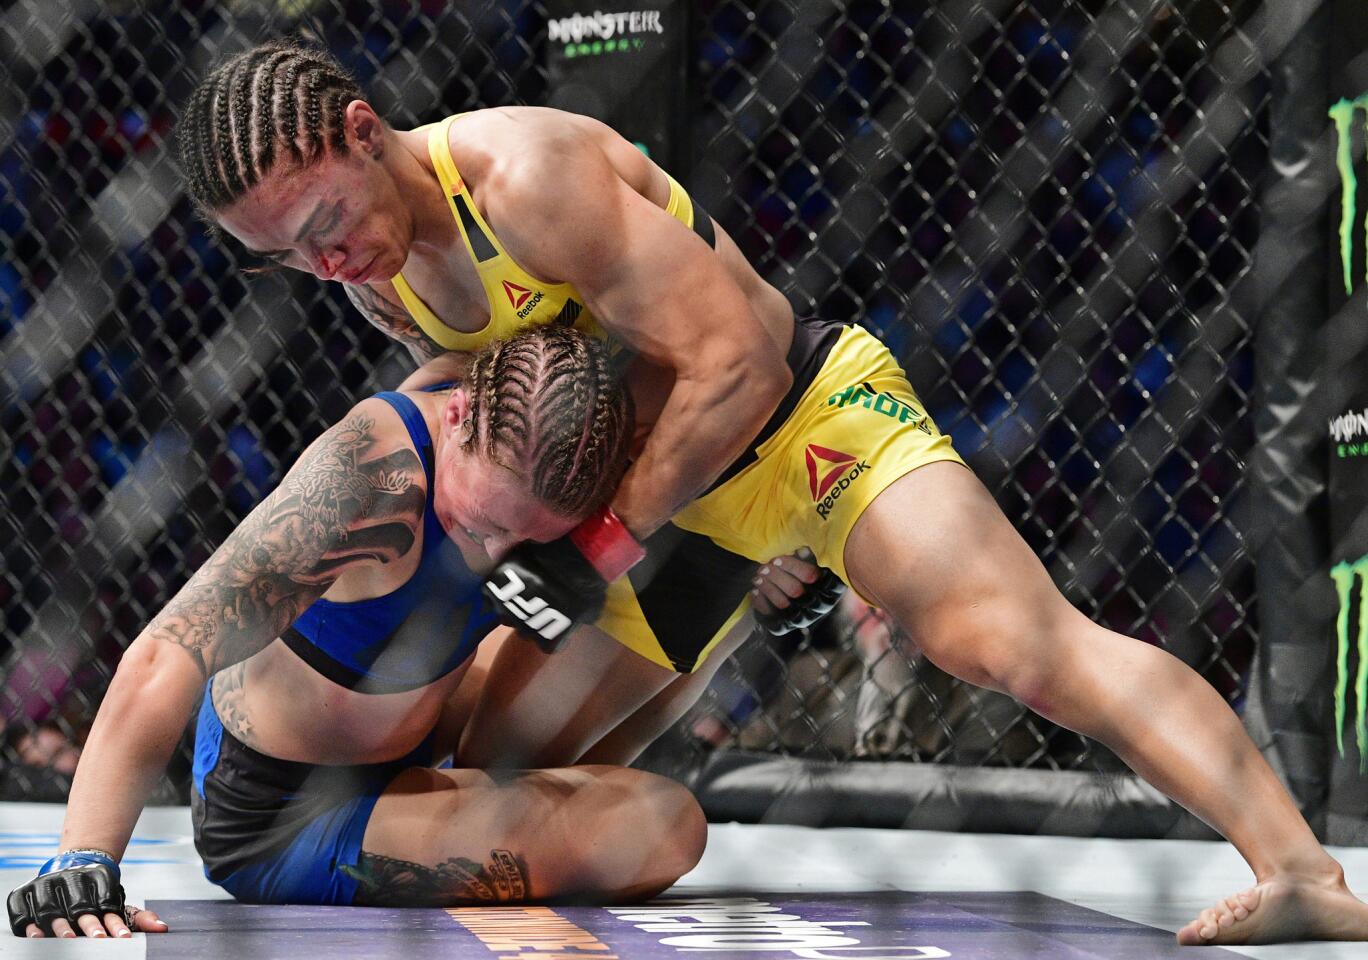 Jessica Andrade, top, defeated Joanne Calderwood By submission Sept. 10 at UFC 203 in Cleveland.